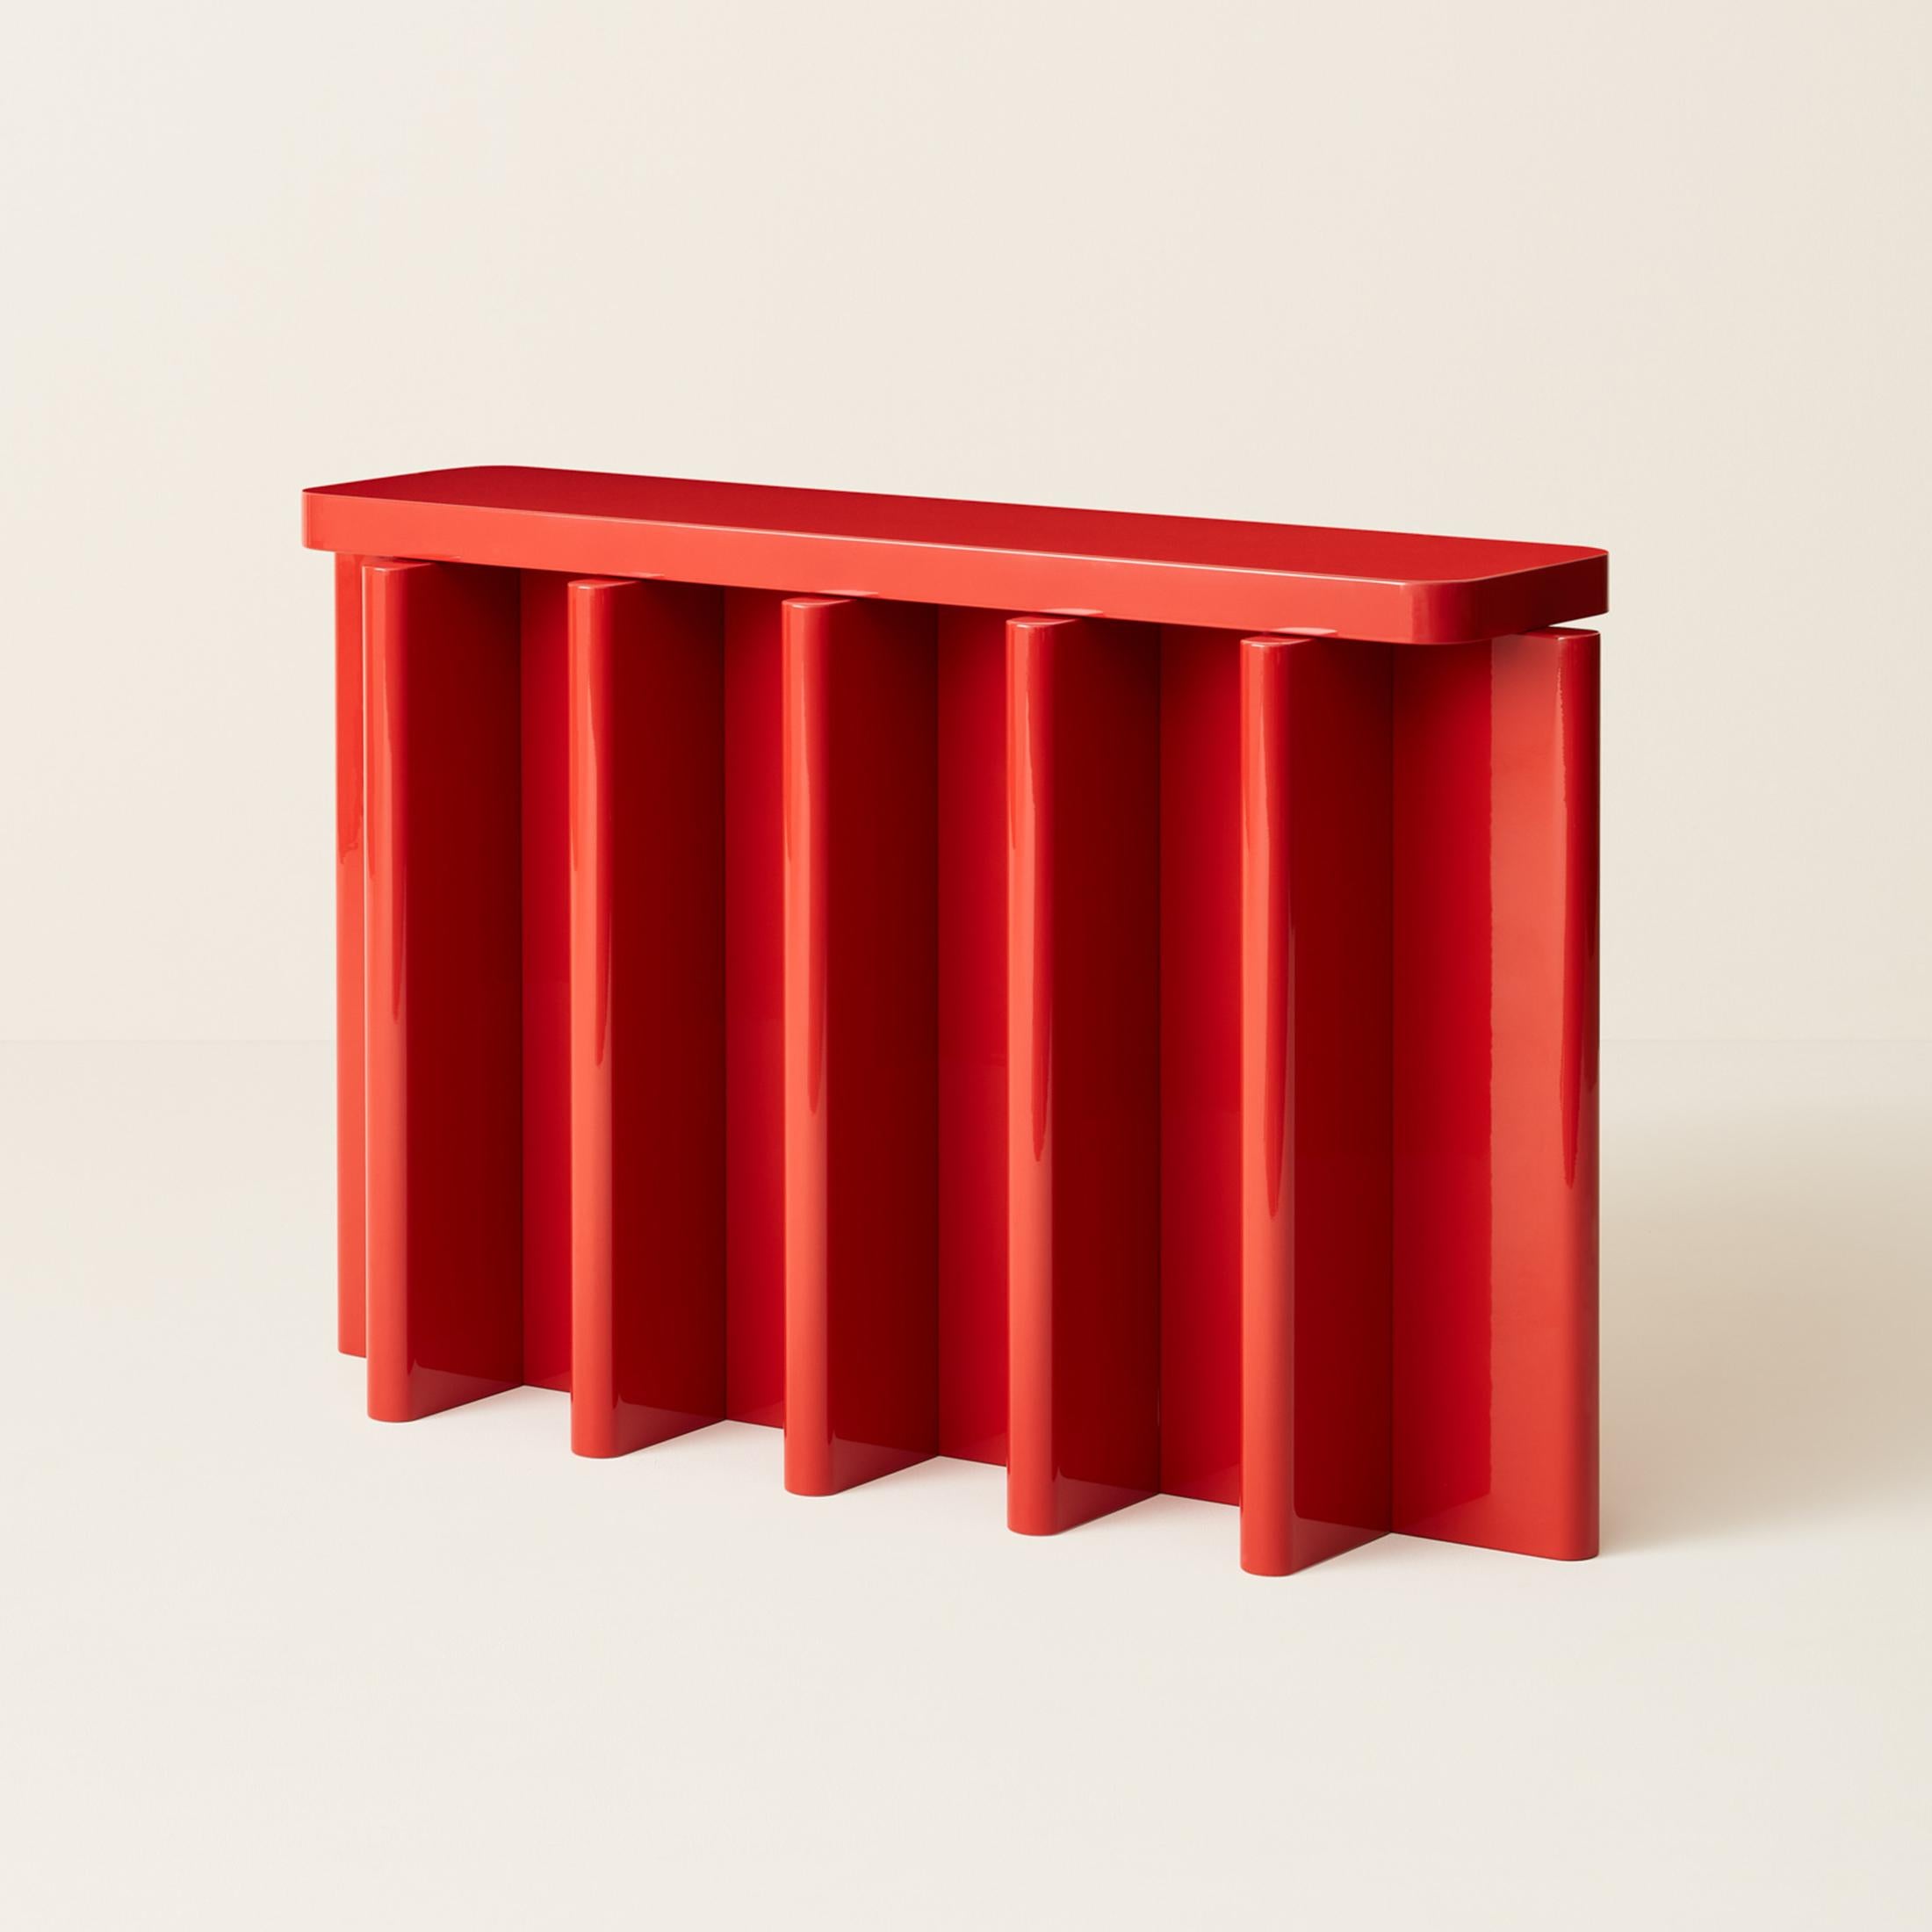 Red Spina C5.1 console table by Cara Davide.
Dimensions: D 130 x W 35 x H 80 cm.
Materials: solid nut wood, lacquered MDF. 
Also available in colors: Bordeaux, Caramel, dusty red, off-white, and natural wood.


Spina is a collection of